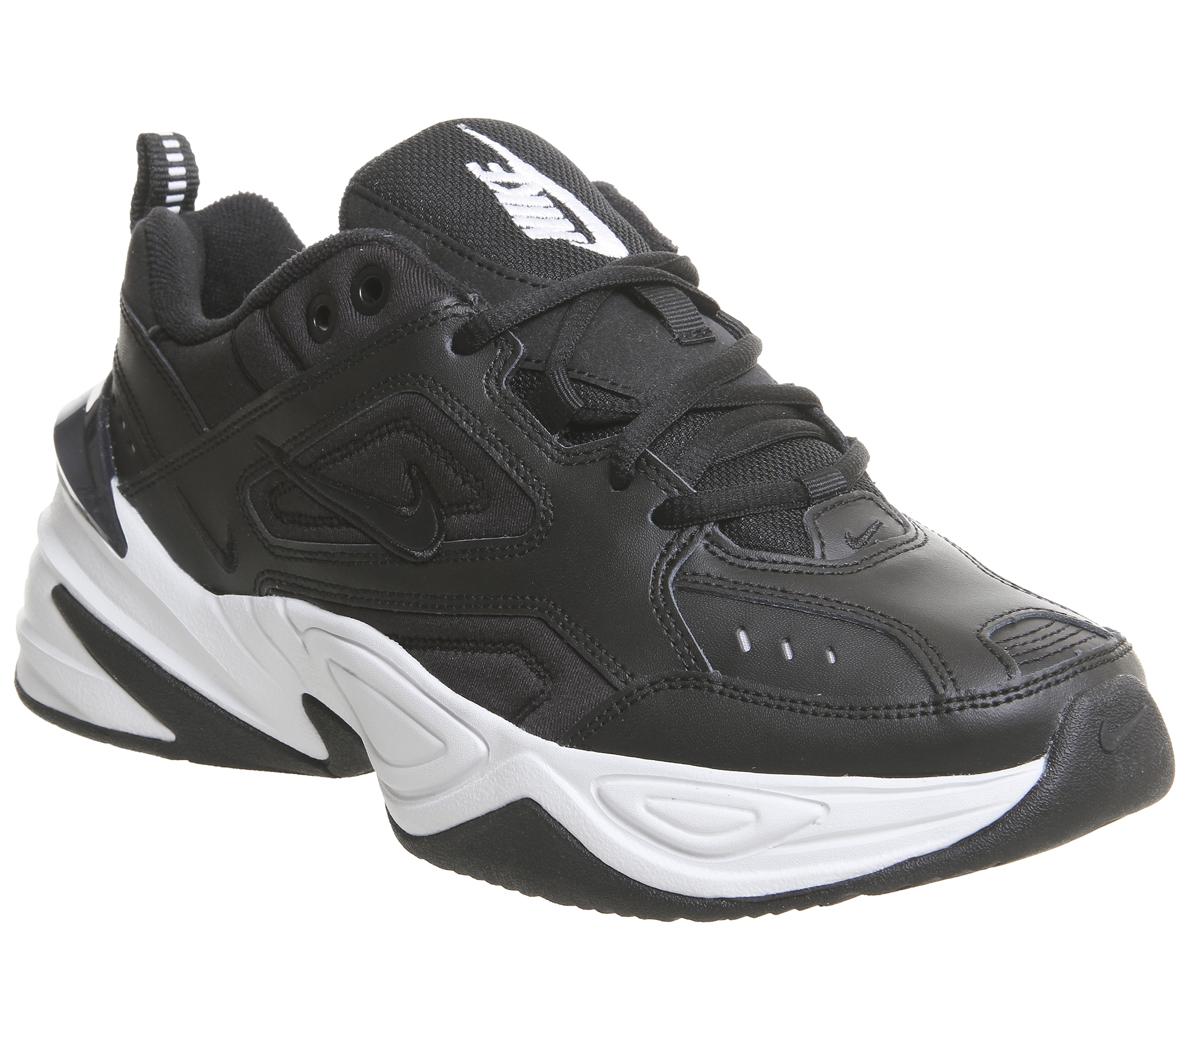 nike m2k tekno trainers in white black and pink